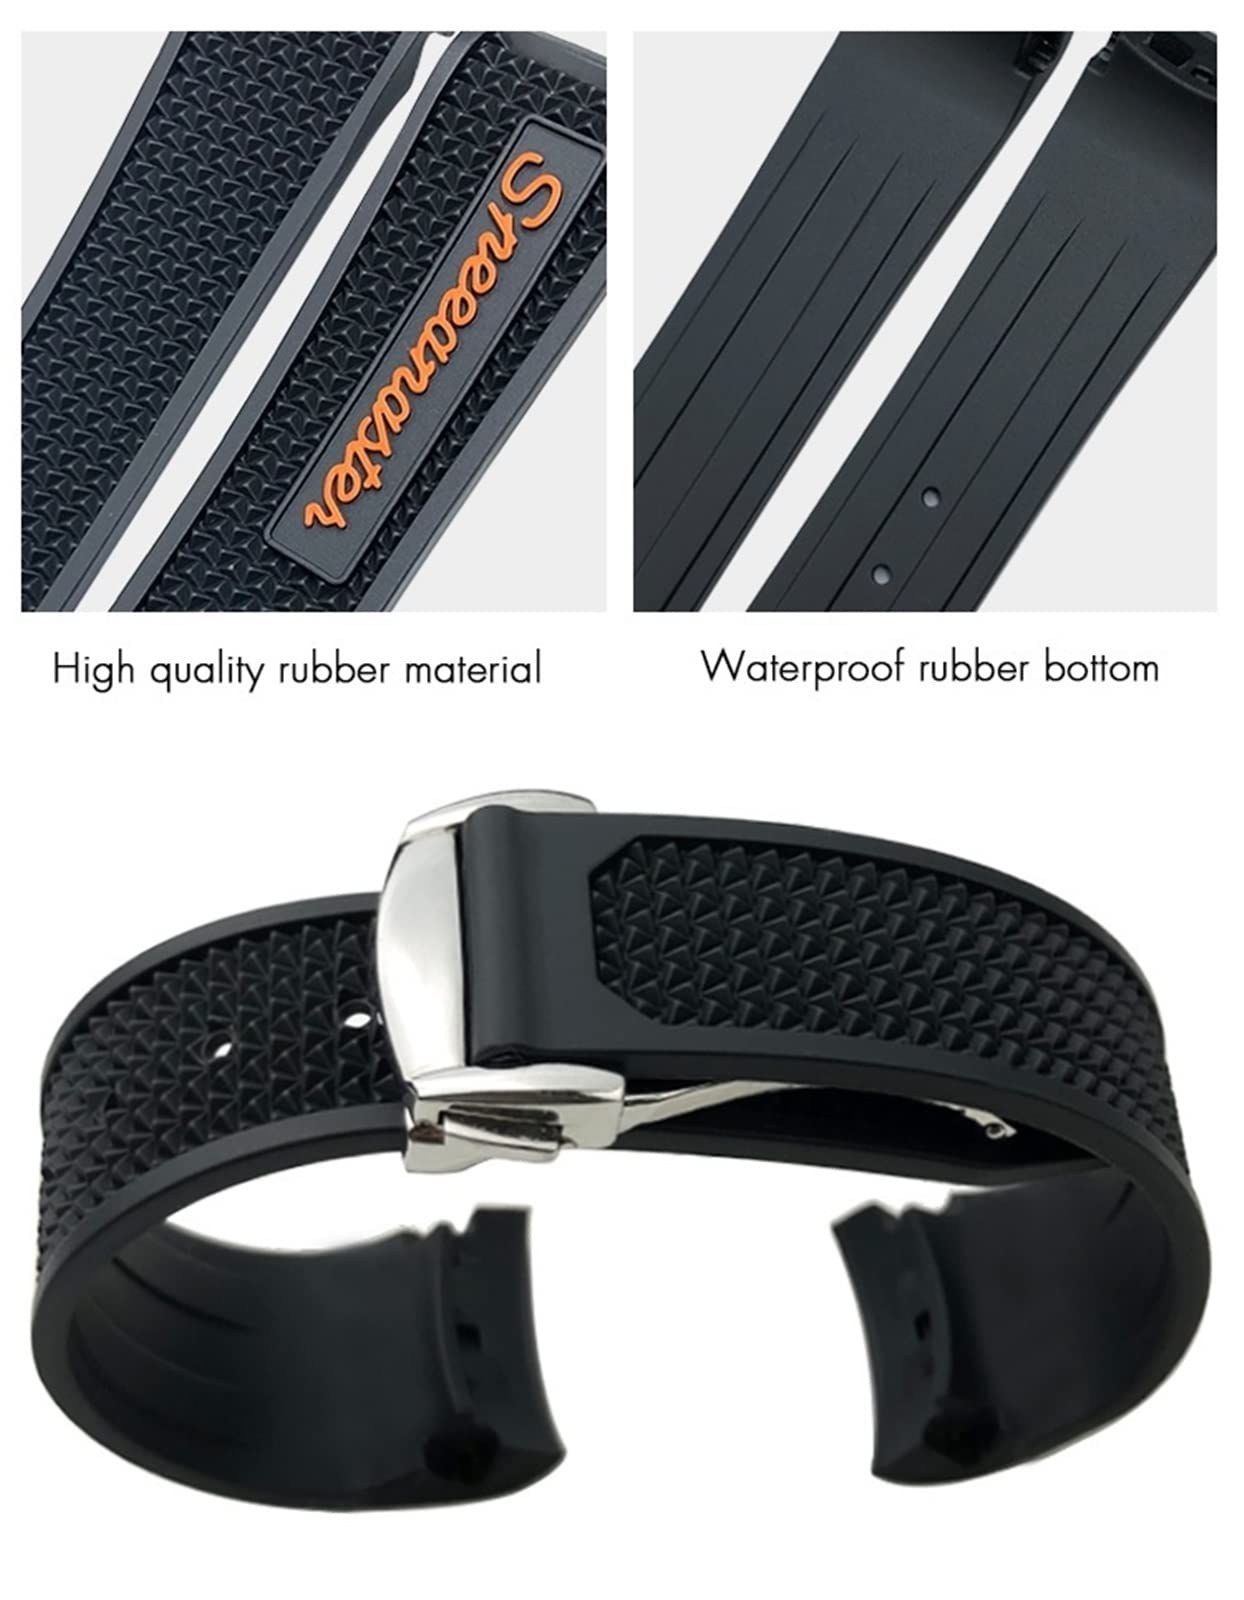 Wscebck 18mm 19mm 20mm 21mm 22mm Rubber Watchband for Omega Sxwatch Moon Watch Speedmaster Seamaster AT150 Tag Heuer Soft Strap (Color : Black Orange Pointy, Size : 20mm)